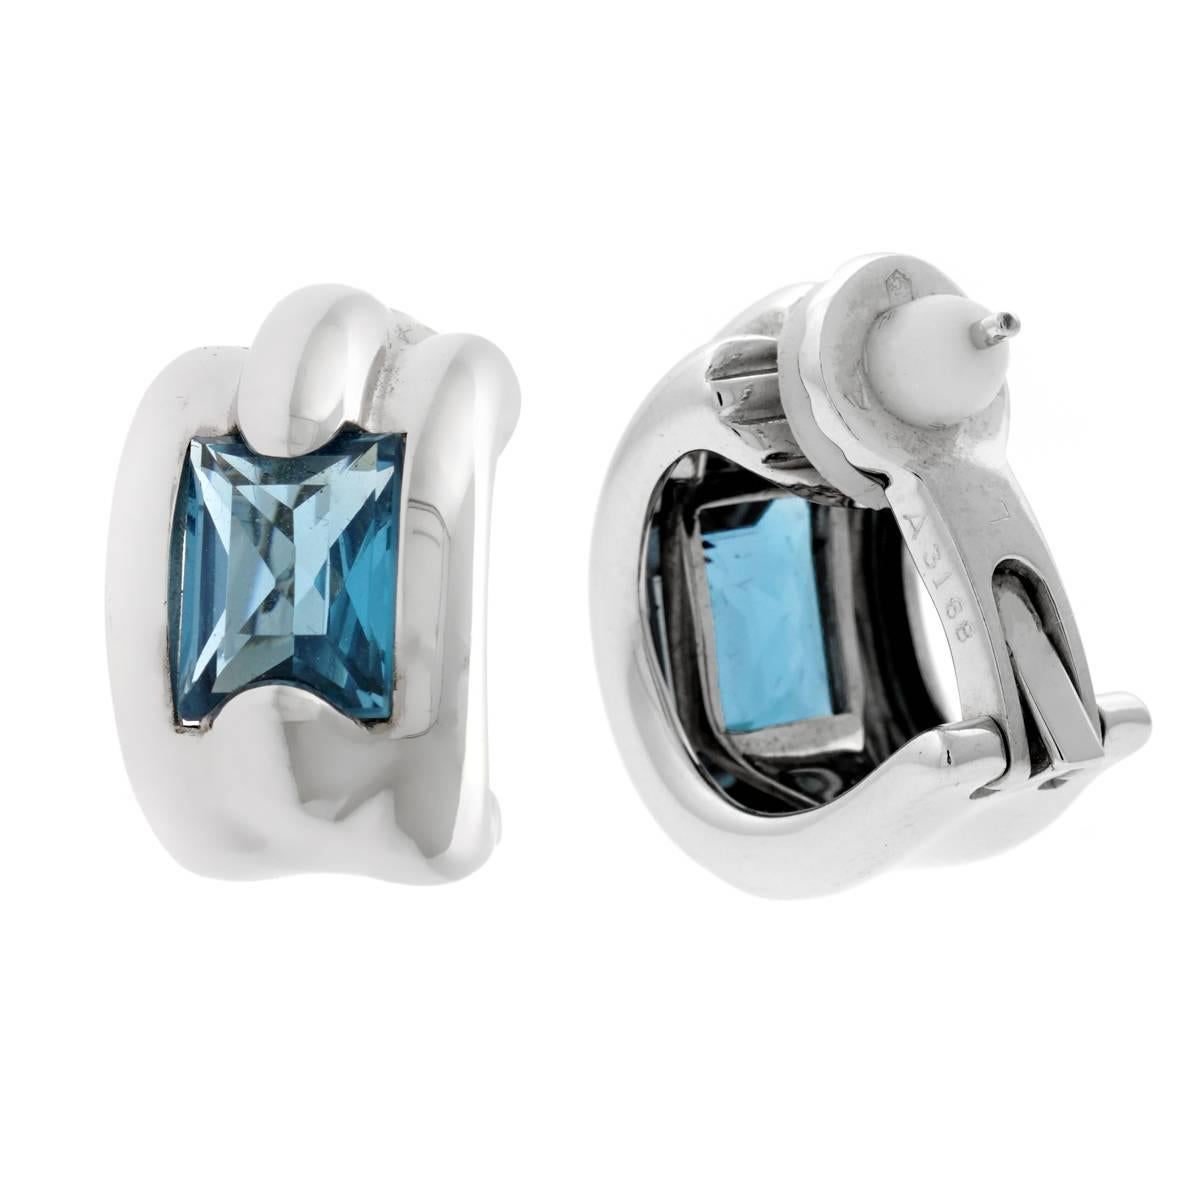 A chic pair of Audemars Piguet earrings featuring blue topaz set in 18k white gold.

Length: .74